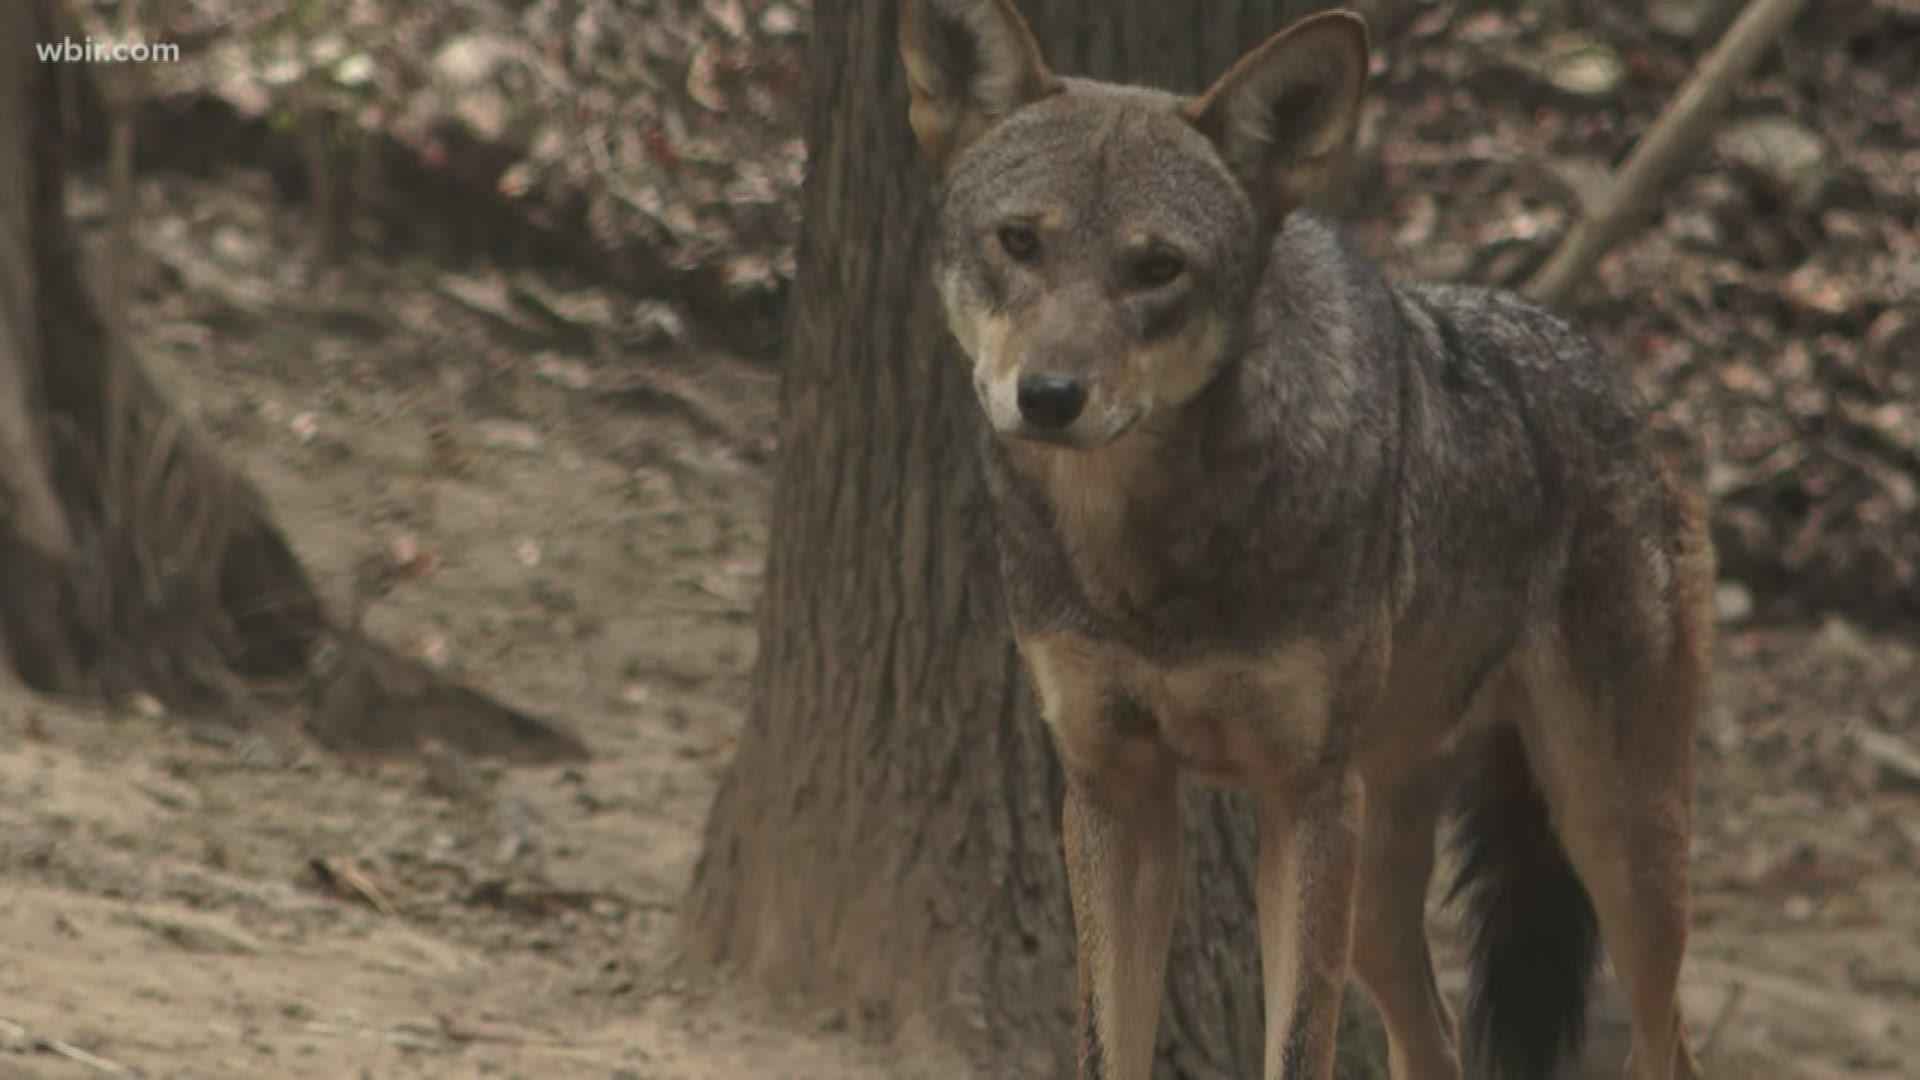 It's been 20 years since the end of a project that tried and failed to reintroduce red wolves in the Smokies.